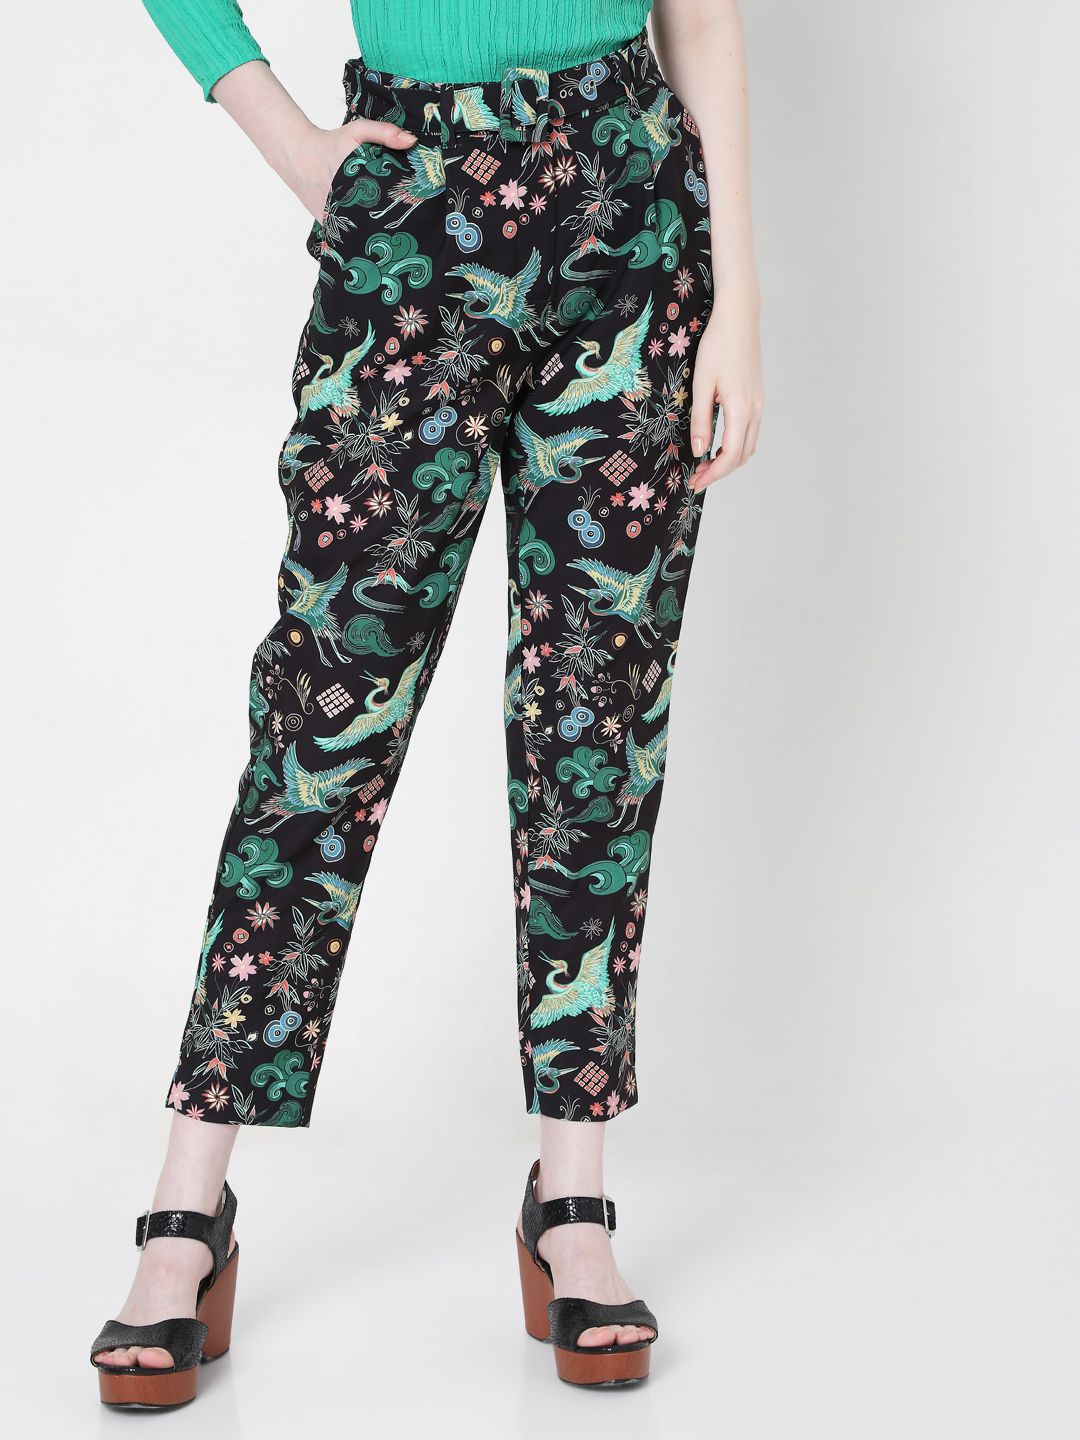 Vero Moda Women Black Floral Printed Slim Fit High-Rise Pleated Trousers Price in India